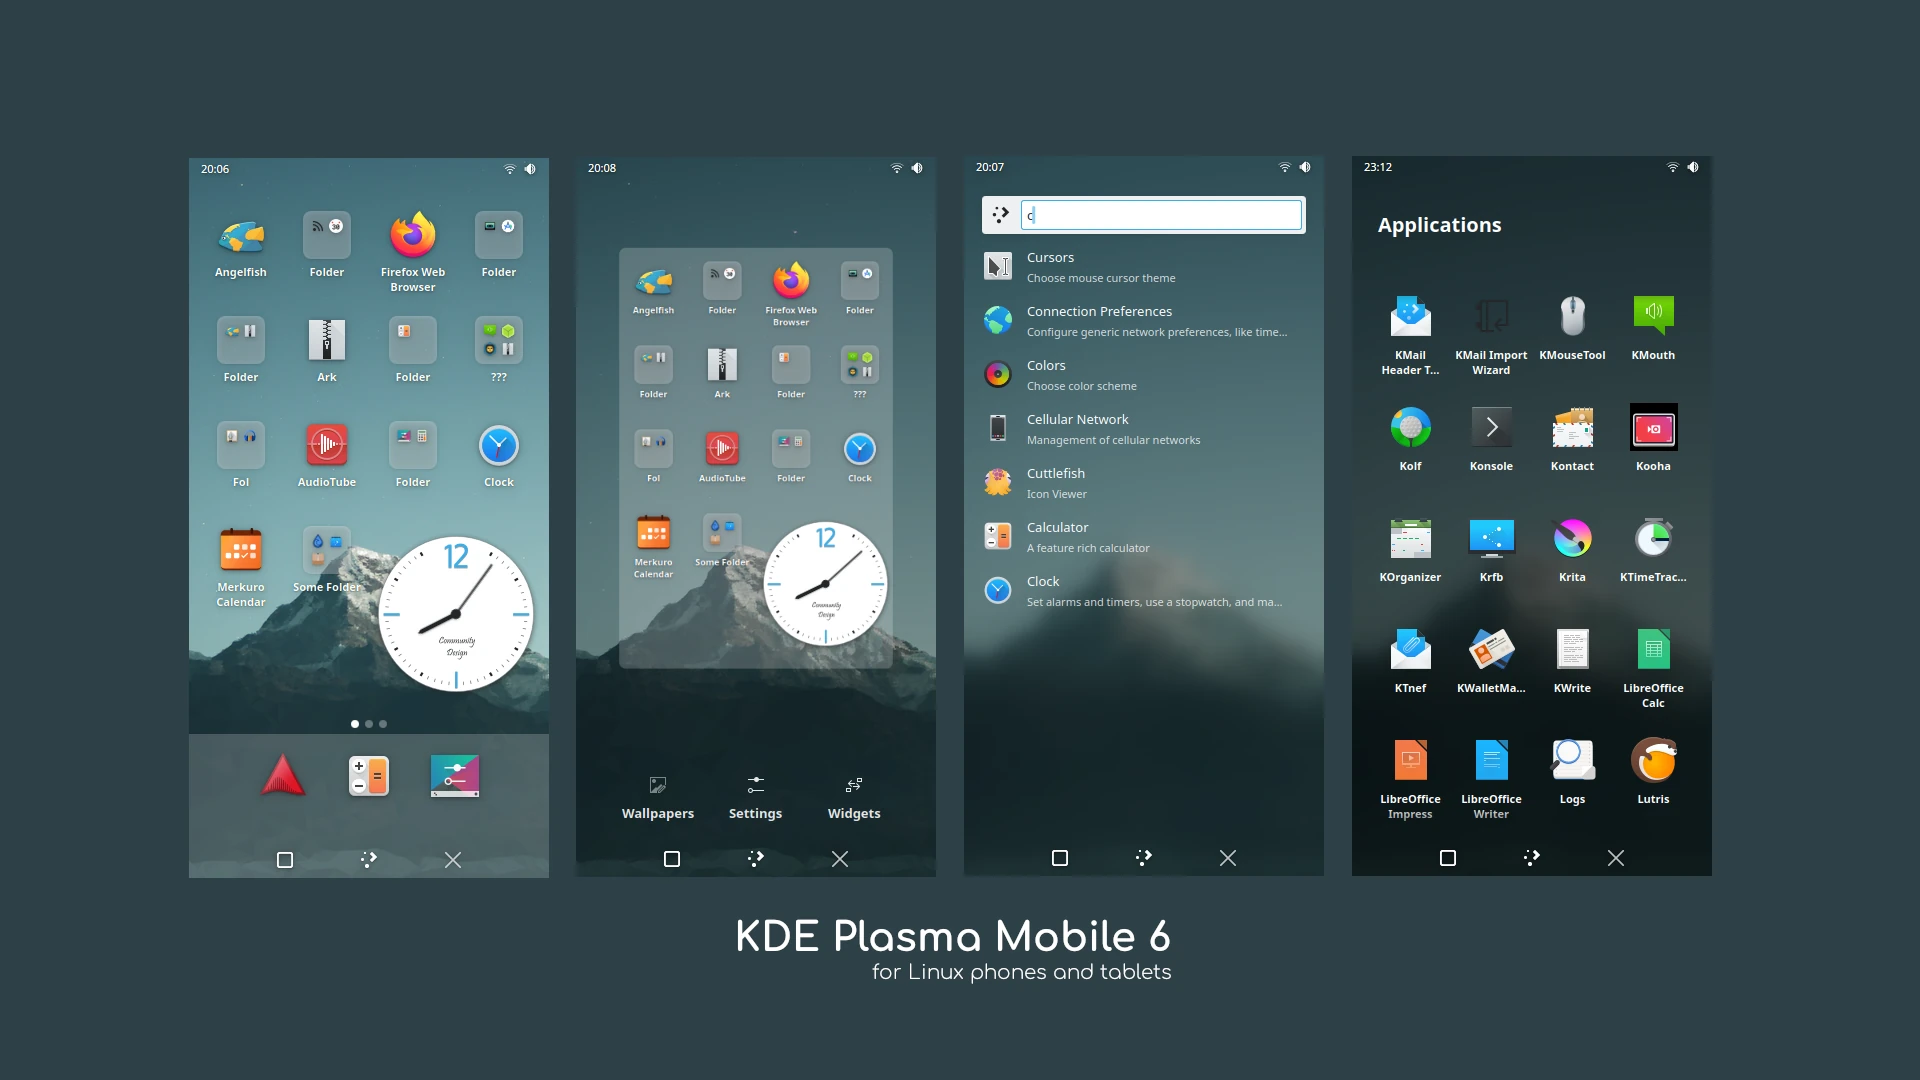 KDE Plasma 6 for Mobile Devices Is Shaping Up Nicely with Support for Applets